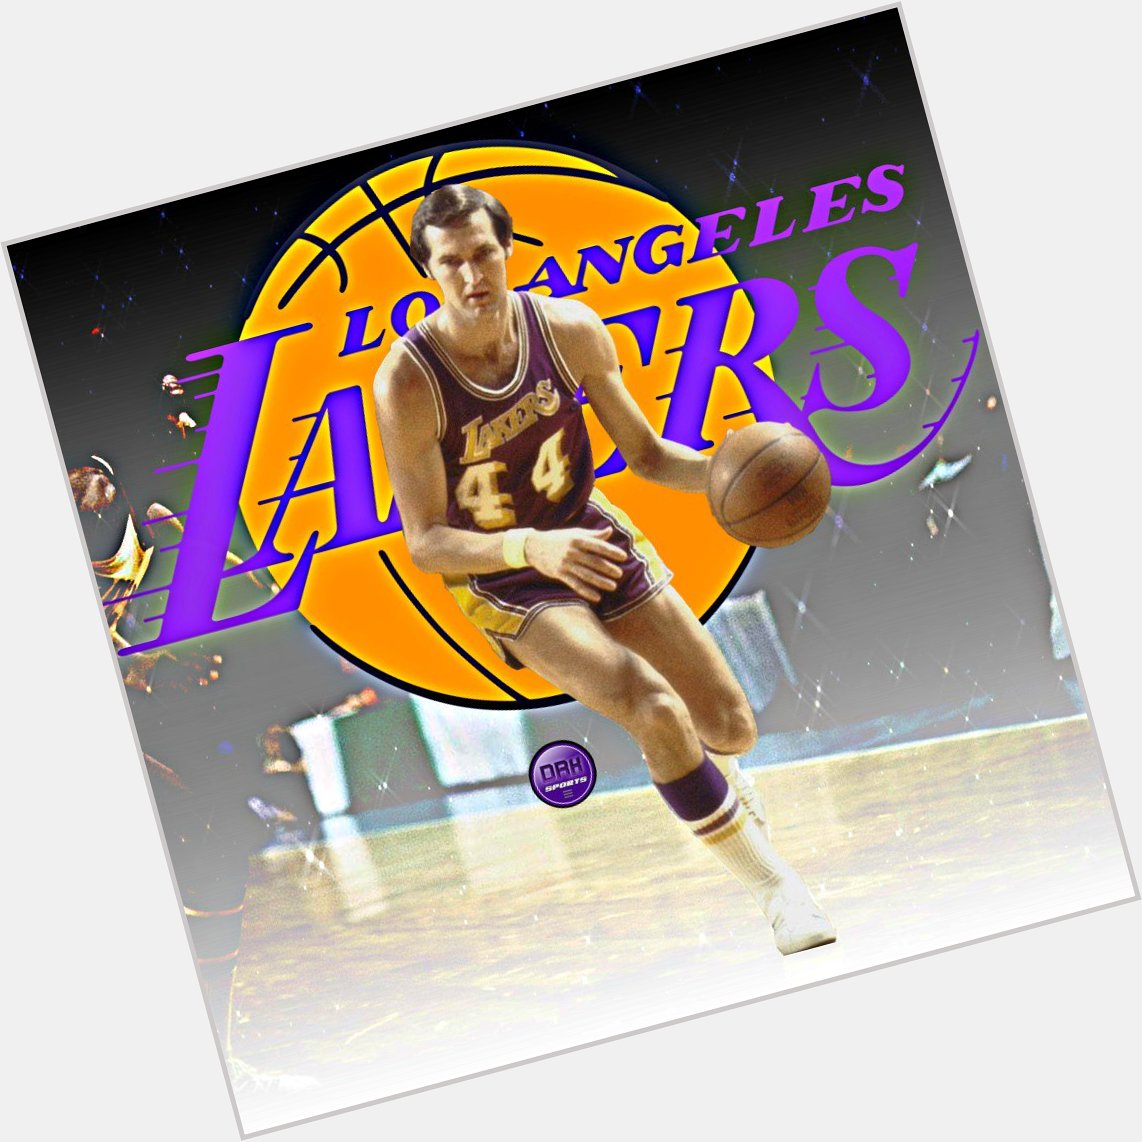 1972 Champ.
1969 Finals MVP.
14x All-Star.
1972 ASG MVP.
12x All-NBA Selection.
Happy 79th Birthday Jerry West! 